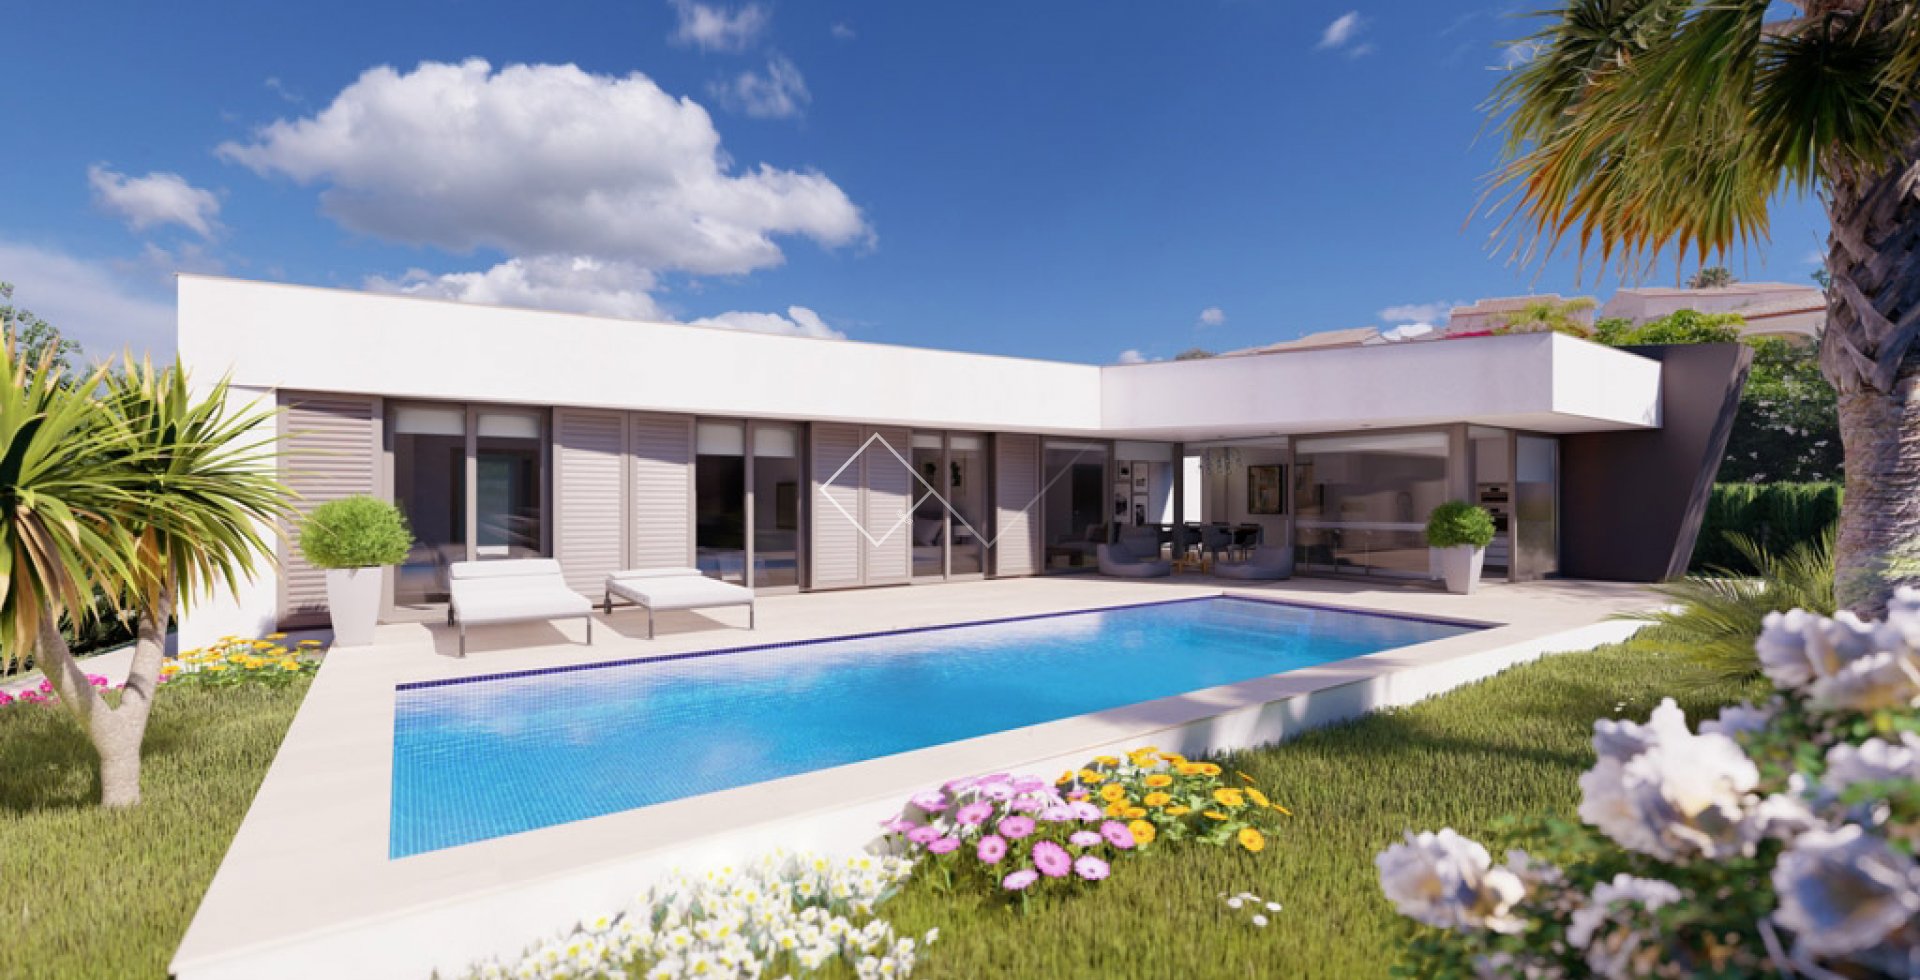 Ibiza style villa with pool - Modern house project in Gran Sol, Calpe